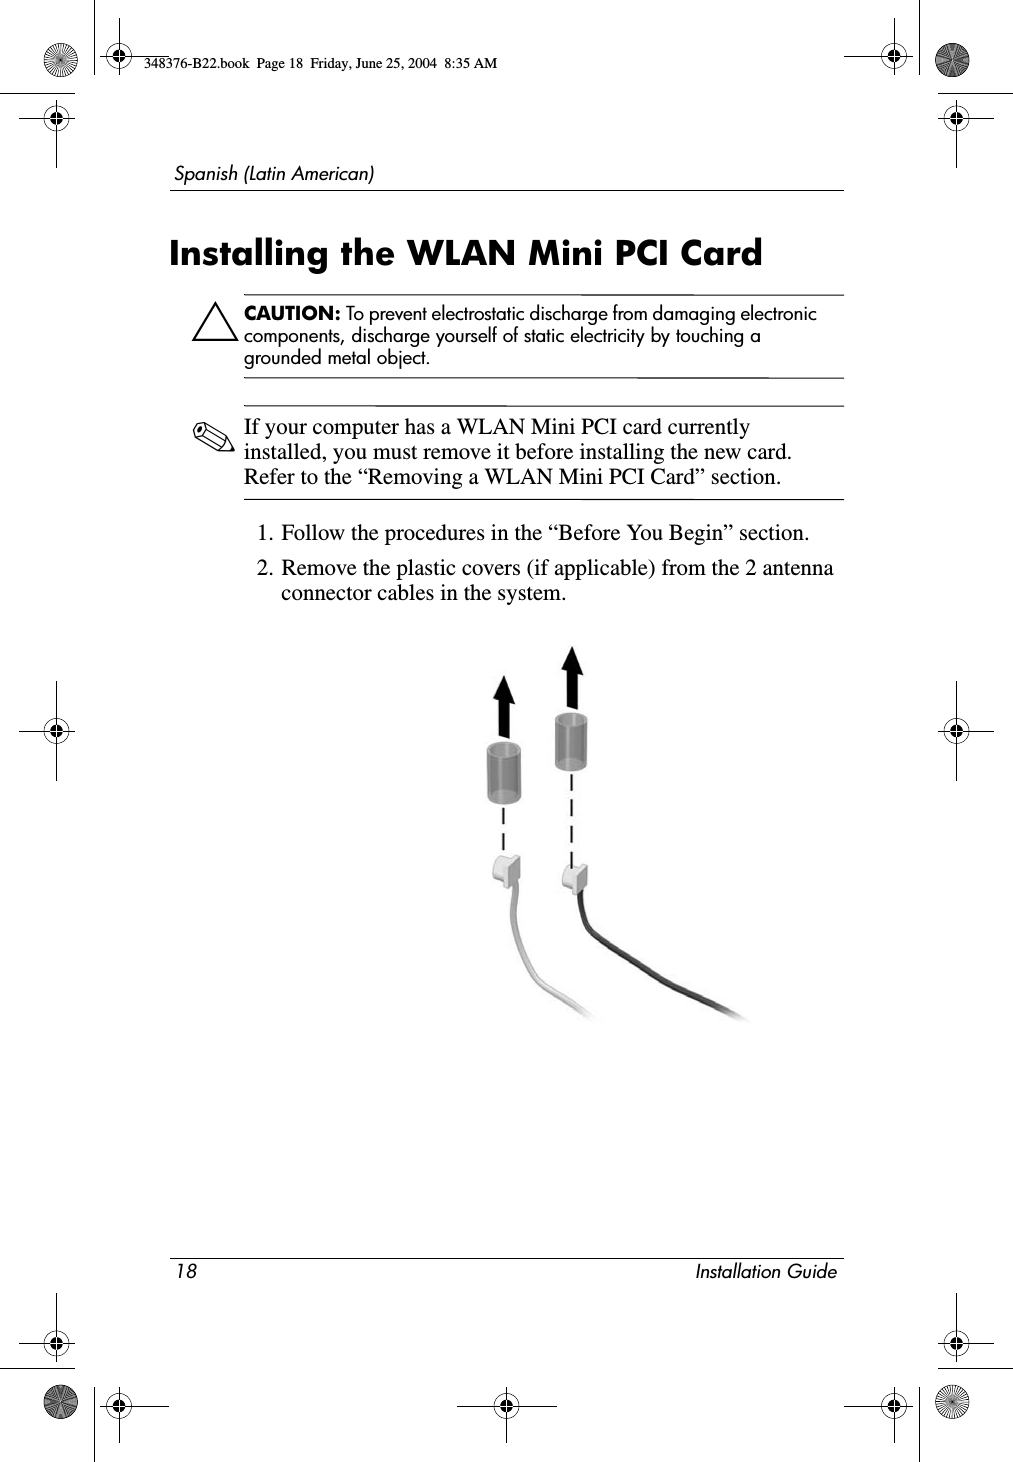 18 Installation GuideSpanish (Latin American)Installing the WLAN Mini PCI CardÄCAUTION: To prevent electrostatic discharge from damaging electronic components, discharge yourself of static electricity by touching a grounded metal object.✎If your computer has a WLAN Mini PCI card currently installed, you must remove it before installing the new card. Refer to the “Removing a WLAN Mini PCI Card” section.1. Follow the procedures in the “Before You Begin” section.2. Remove the plastic covers (if applicable) from the 2 antenna connector cables in the system.348376-B22.book  Page 18  Friday, June 25, 2004  8:35 AM